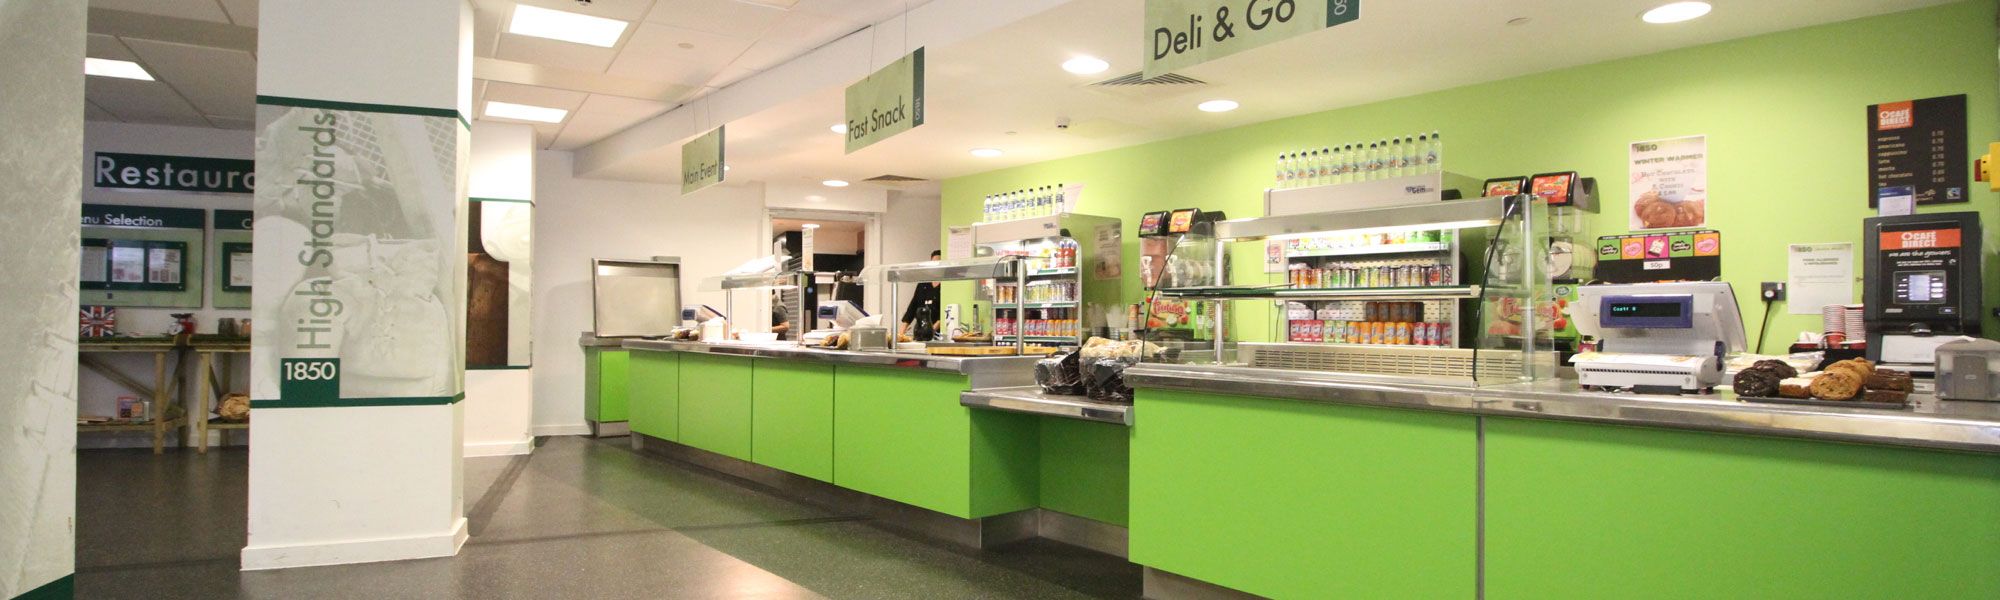 Canteen at William Brookes School